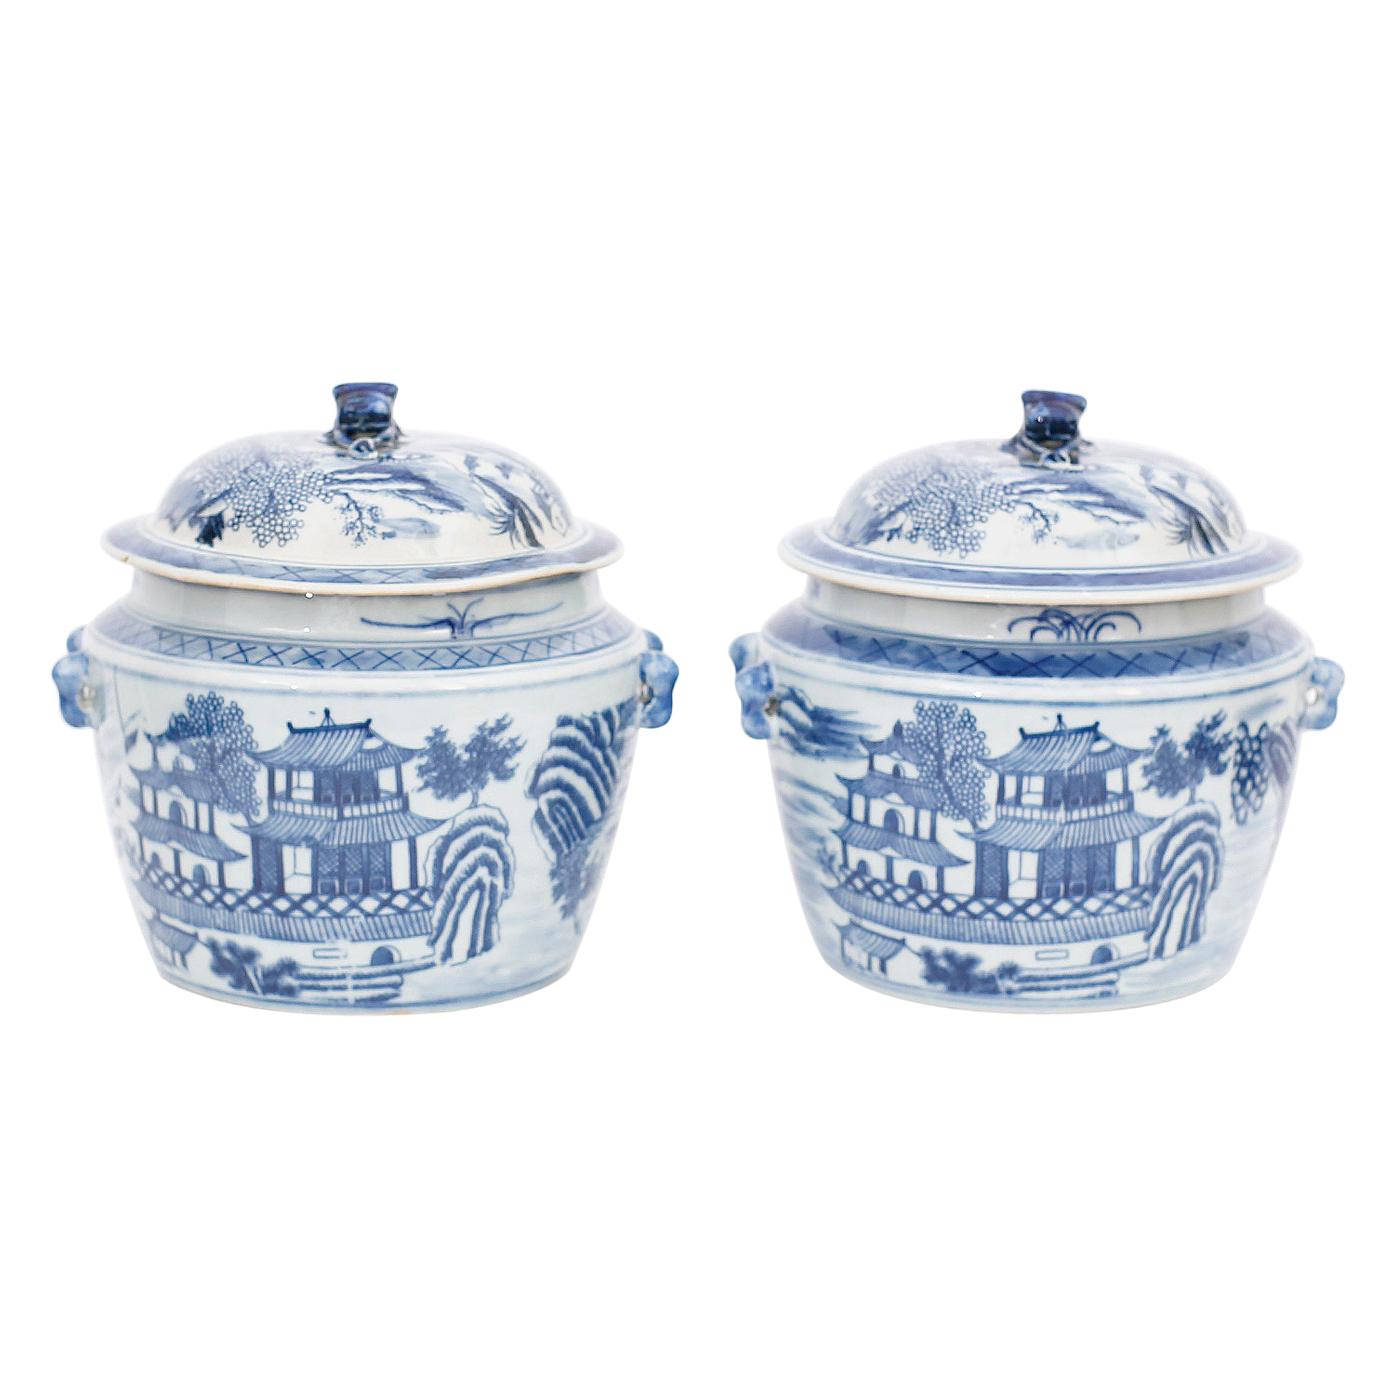 Pair of Blue and White Porcelain Pots with Pagodas For Sale